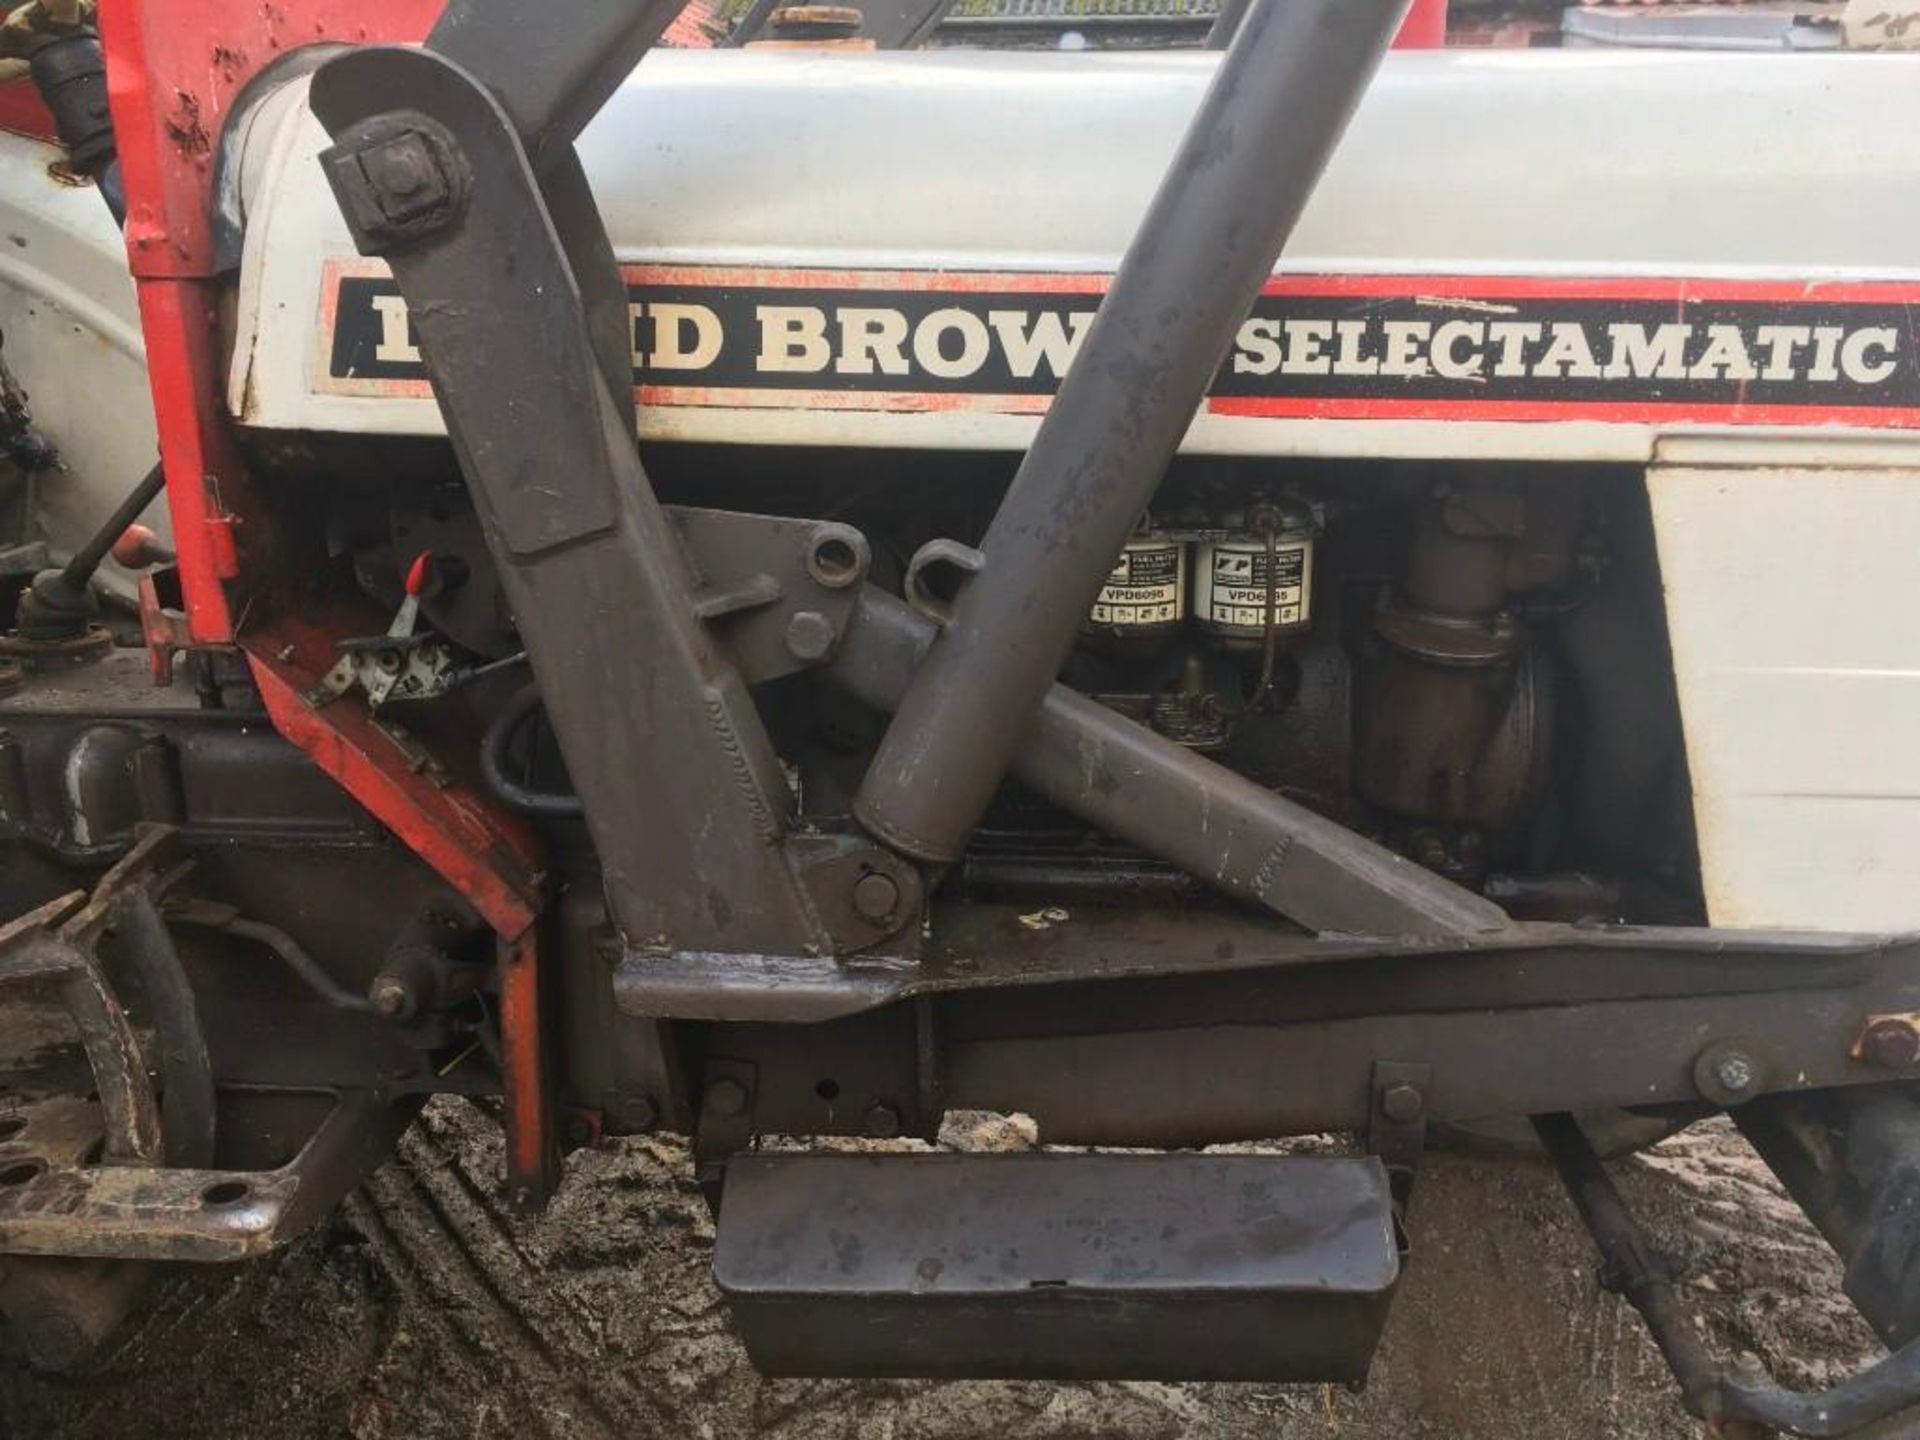 1969 David Brown 880 Selectamatic tractor with hydraulic front loader with circa 600kg lifting capac - Image 15 of 18